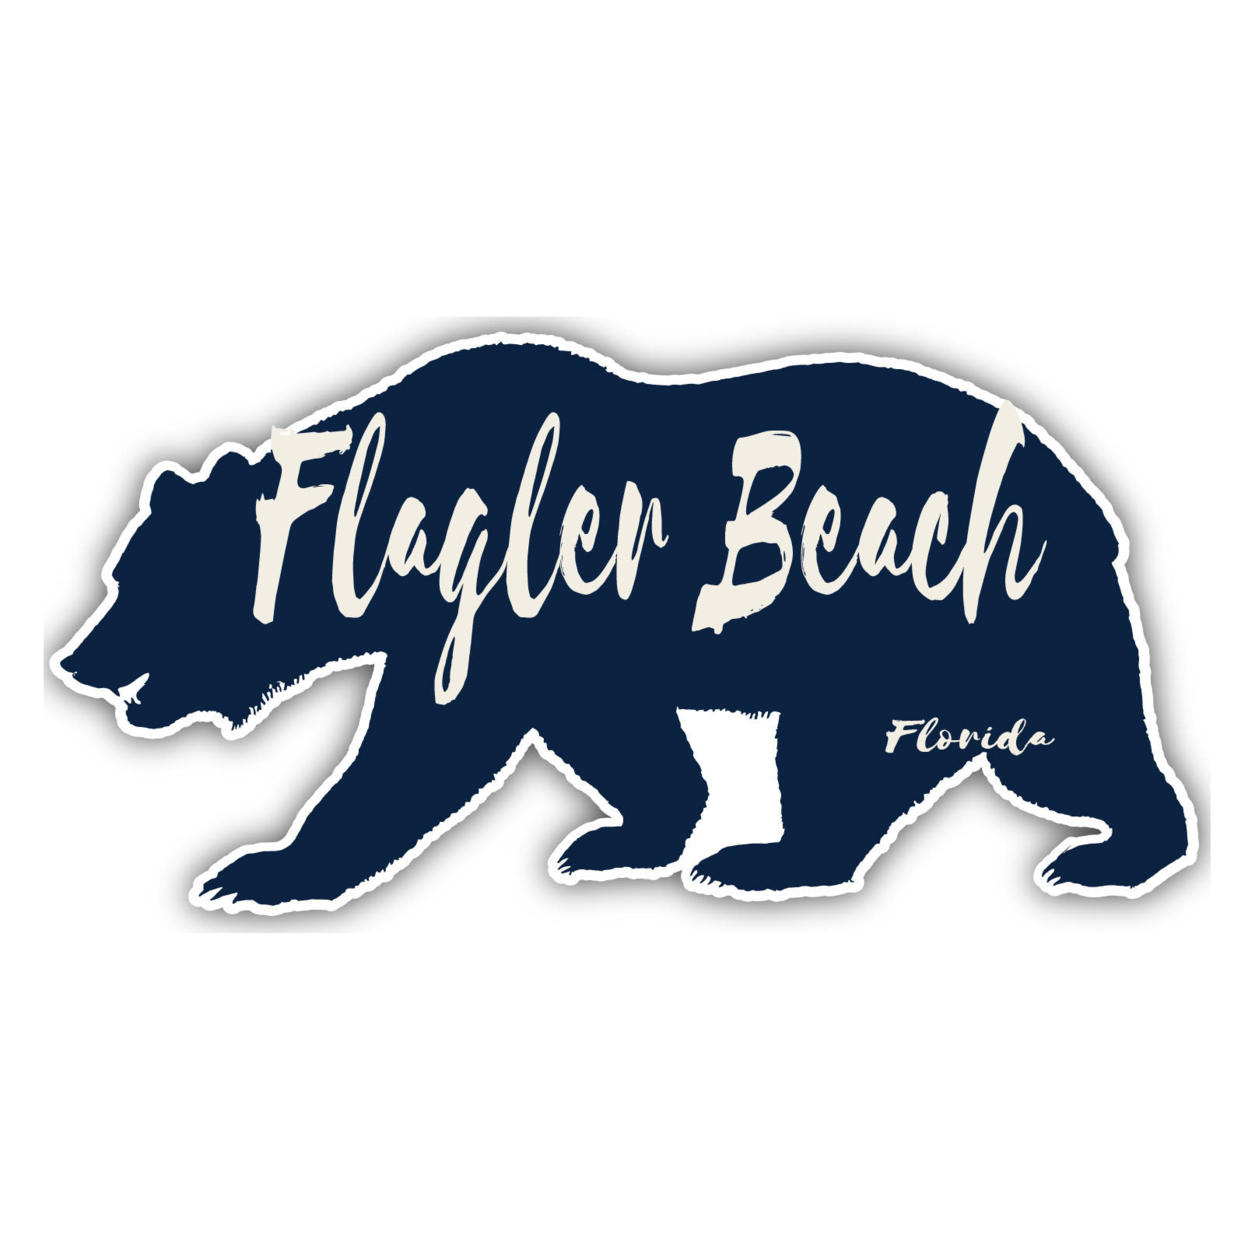 Flagler Beach Florida Souvenir Decorative Stickers (Choose Theme And Size) - 4-Pack, 8-Inch, Tent